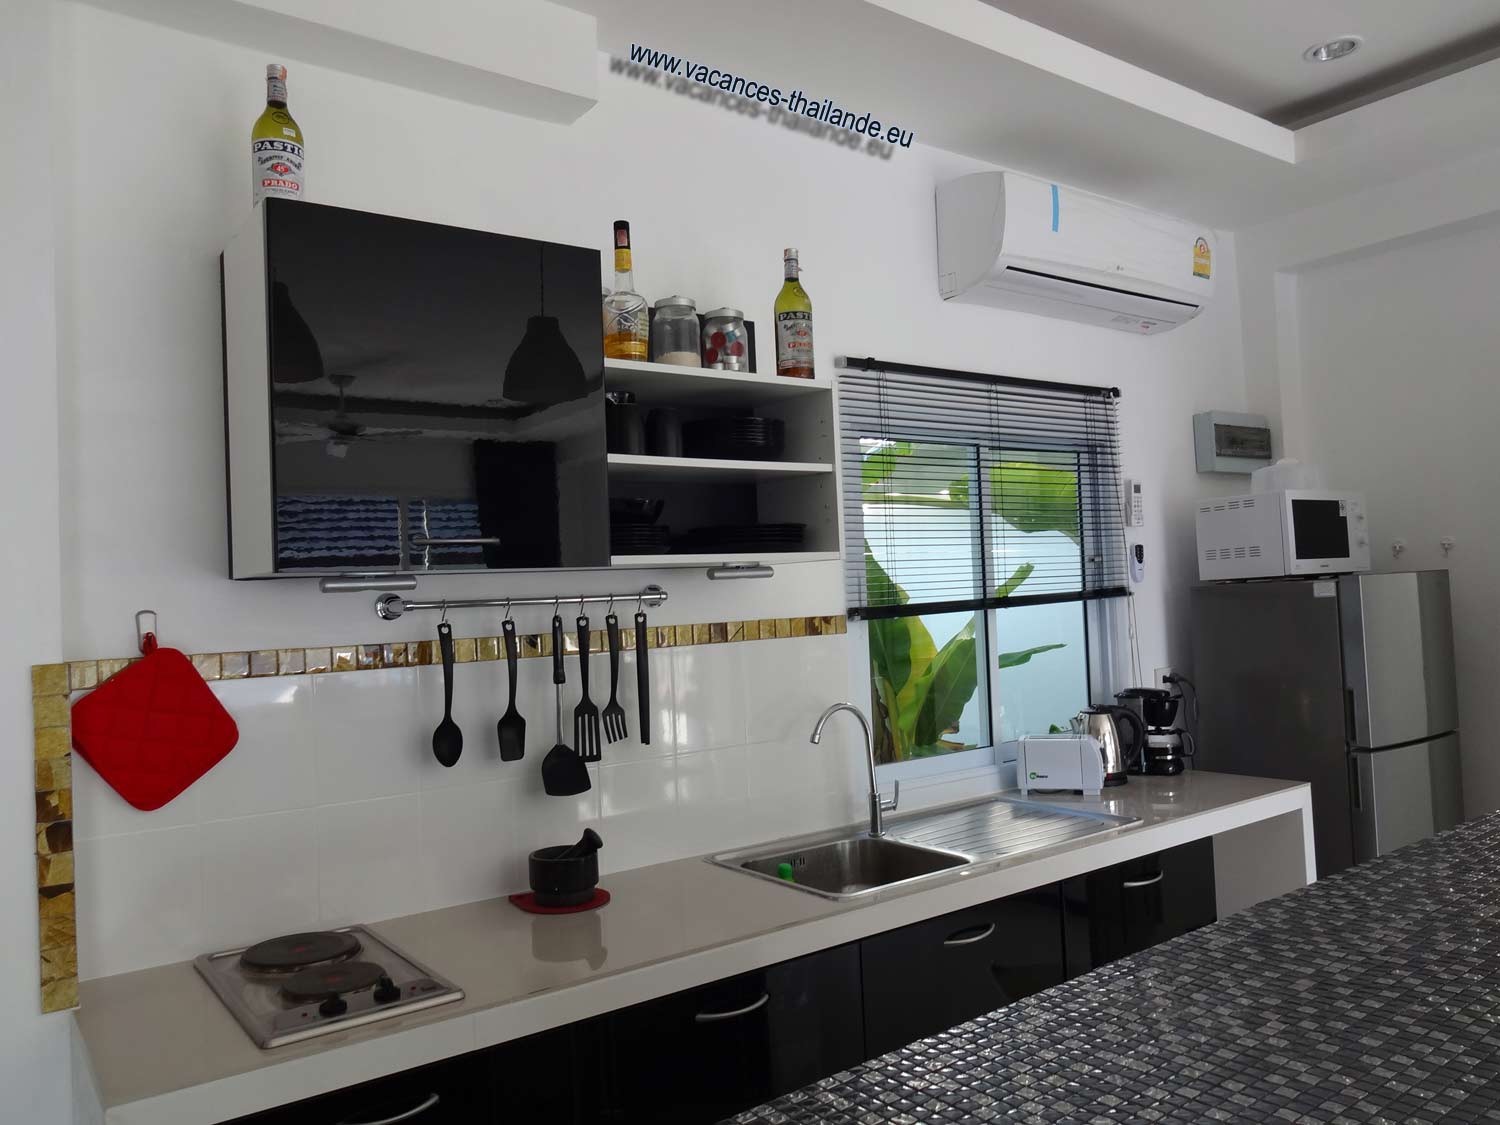 Photo 33 english kitchen electric stove, microwave oven and various accessory koh samui